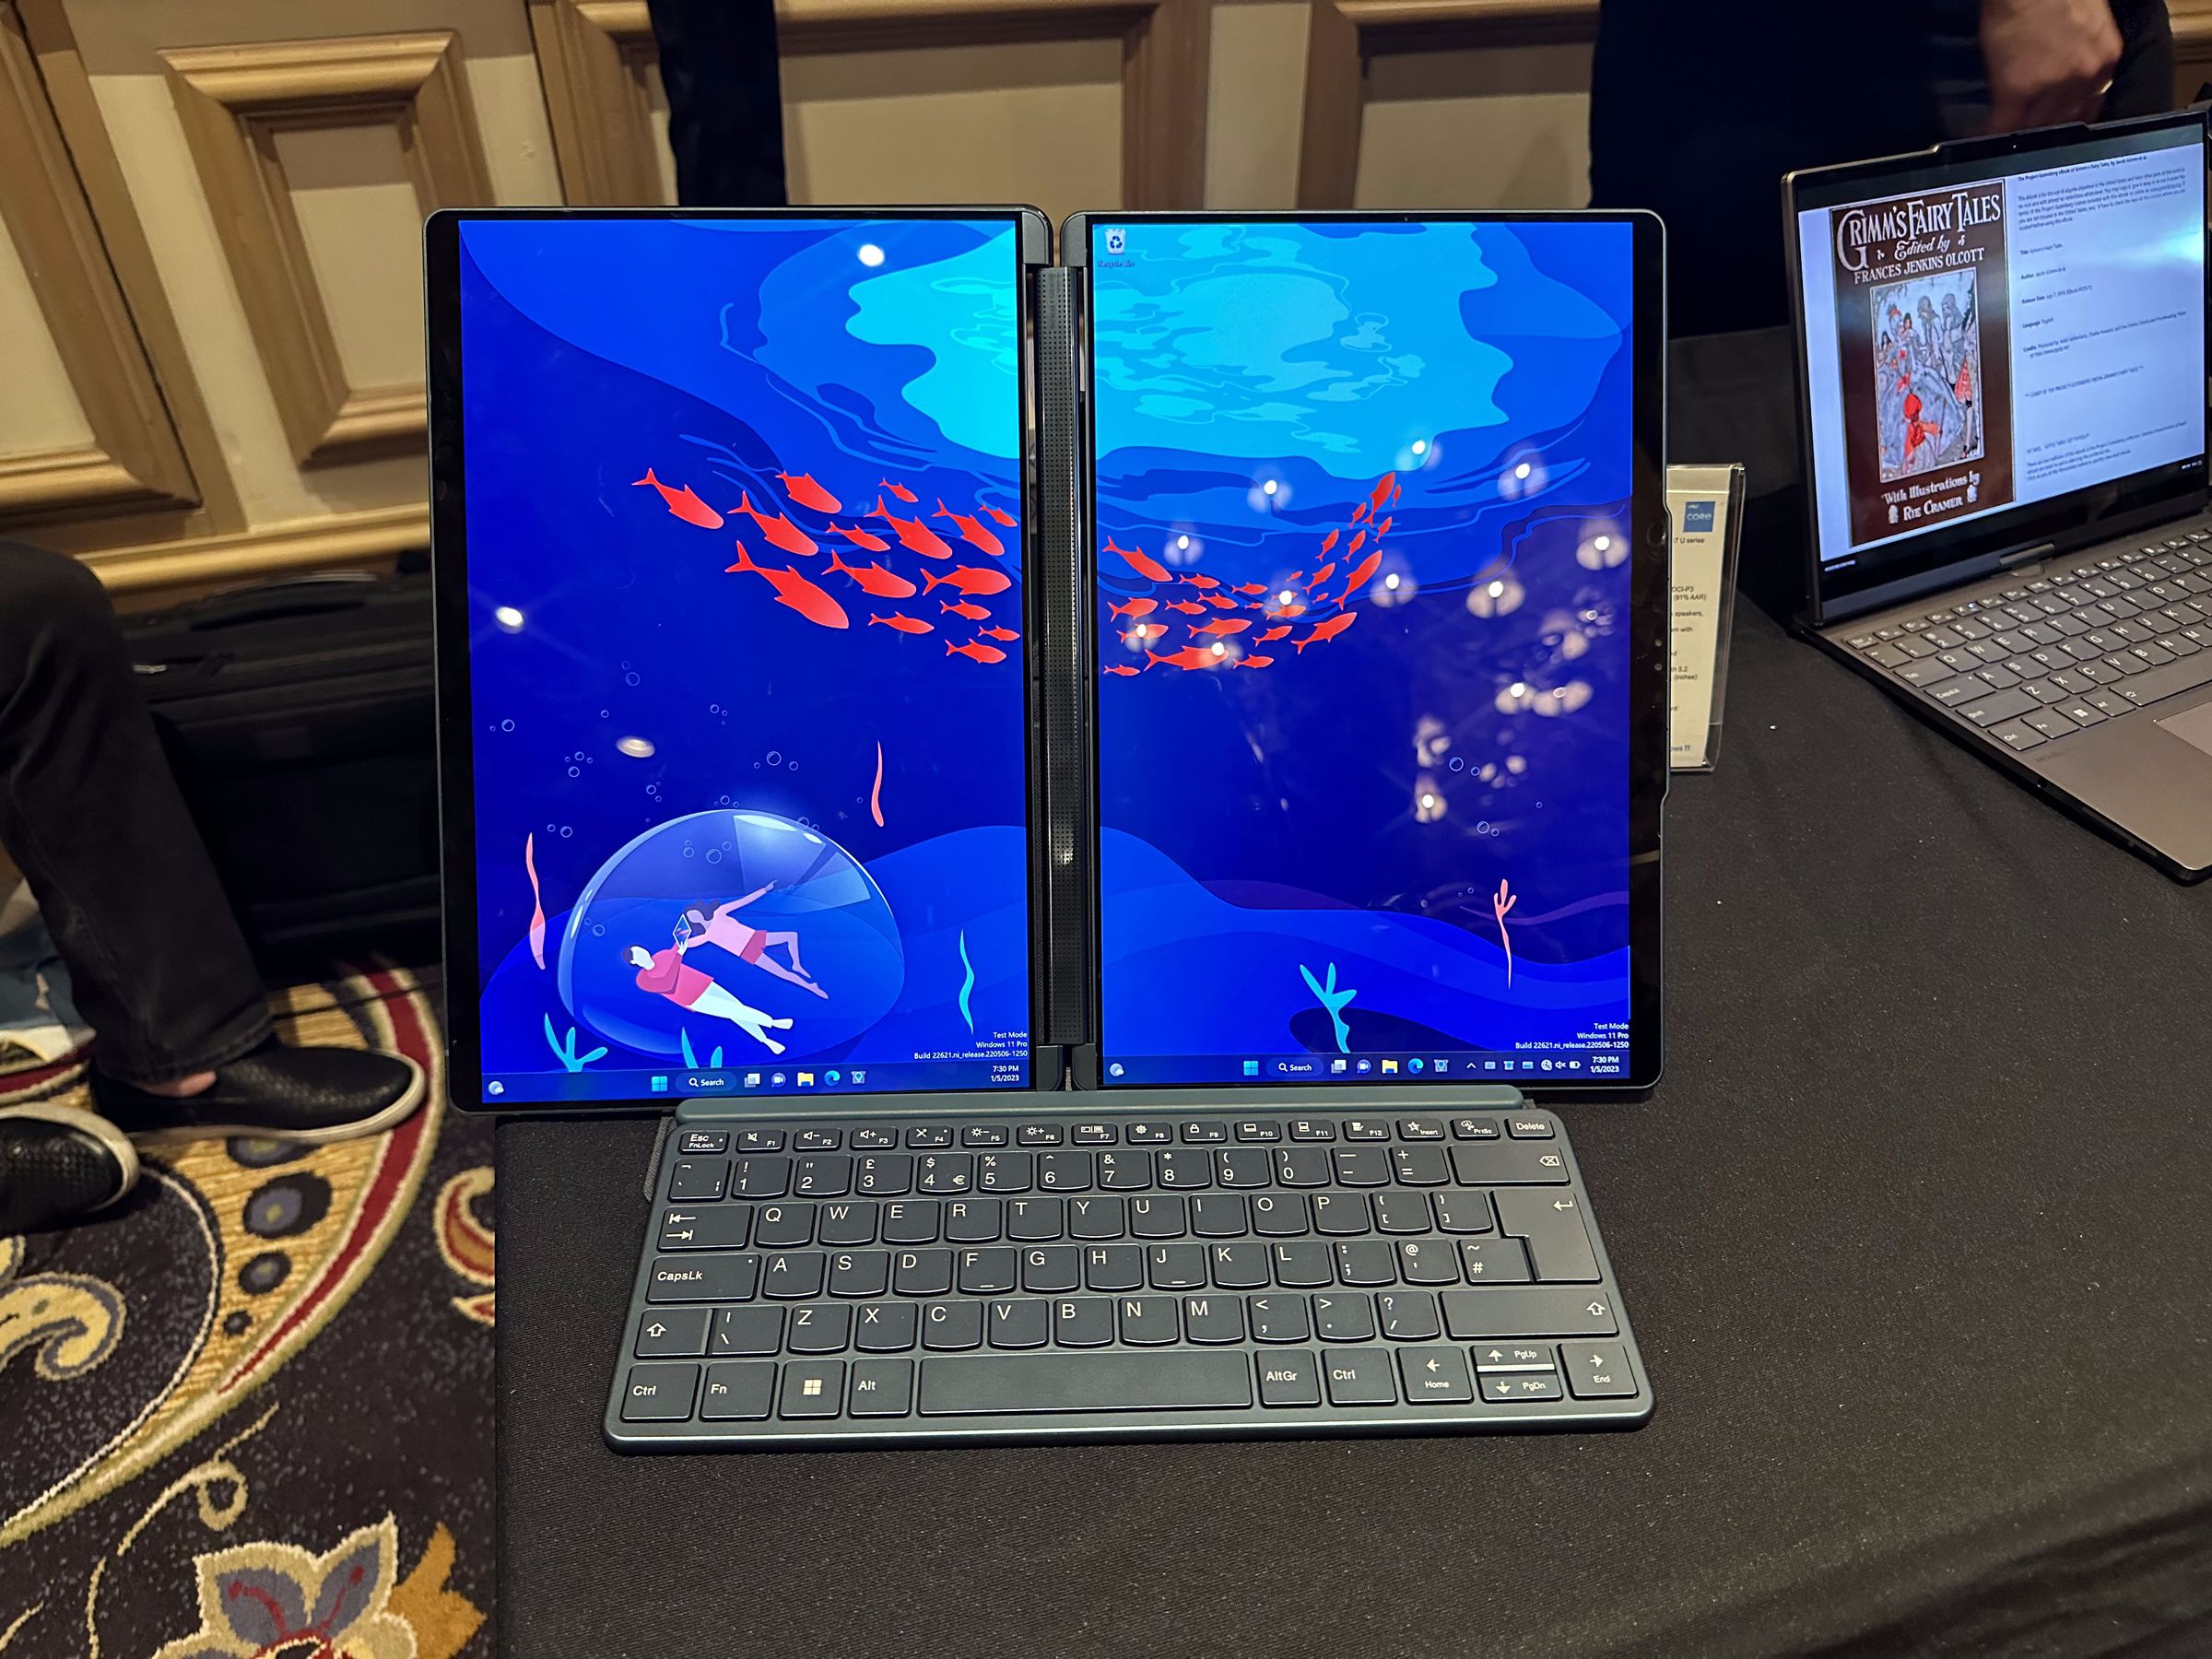 Lenovo Yoga Book 9i in landscape mode with keyboard attached.